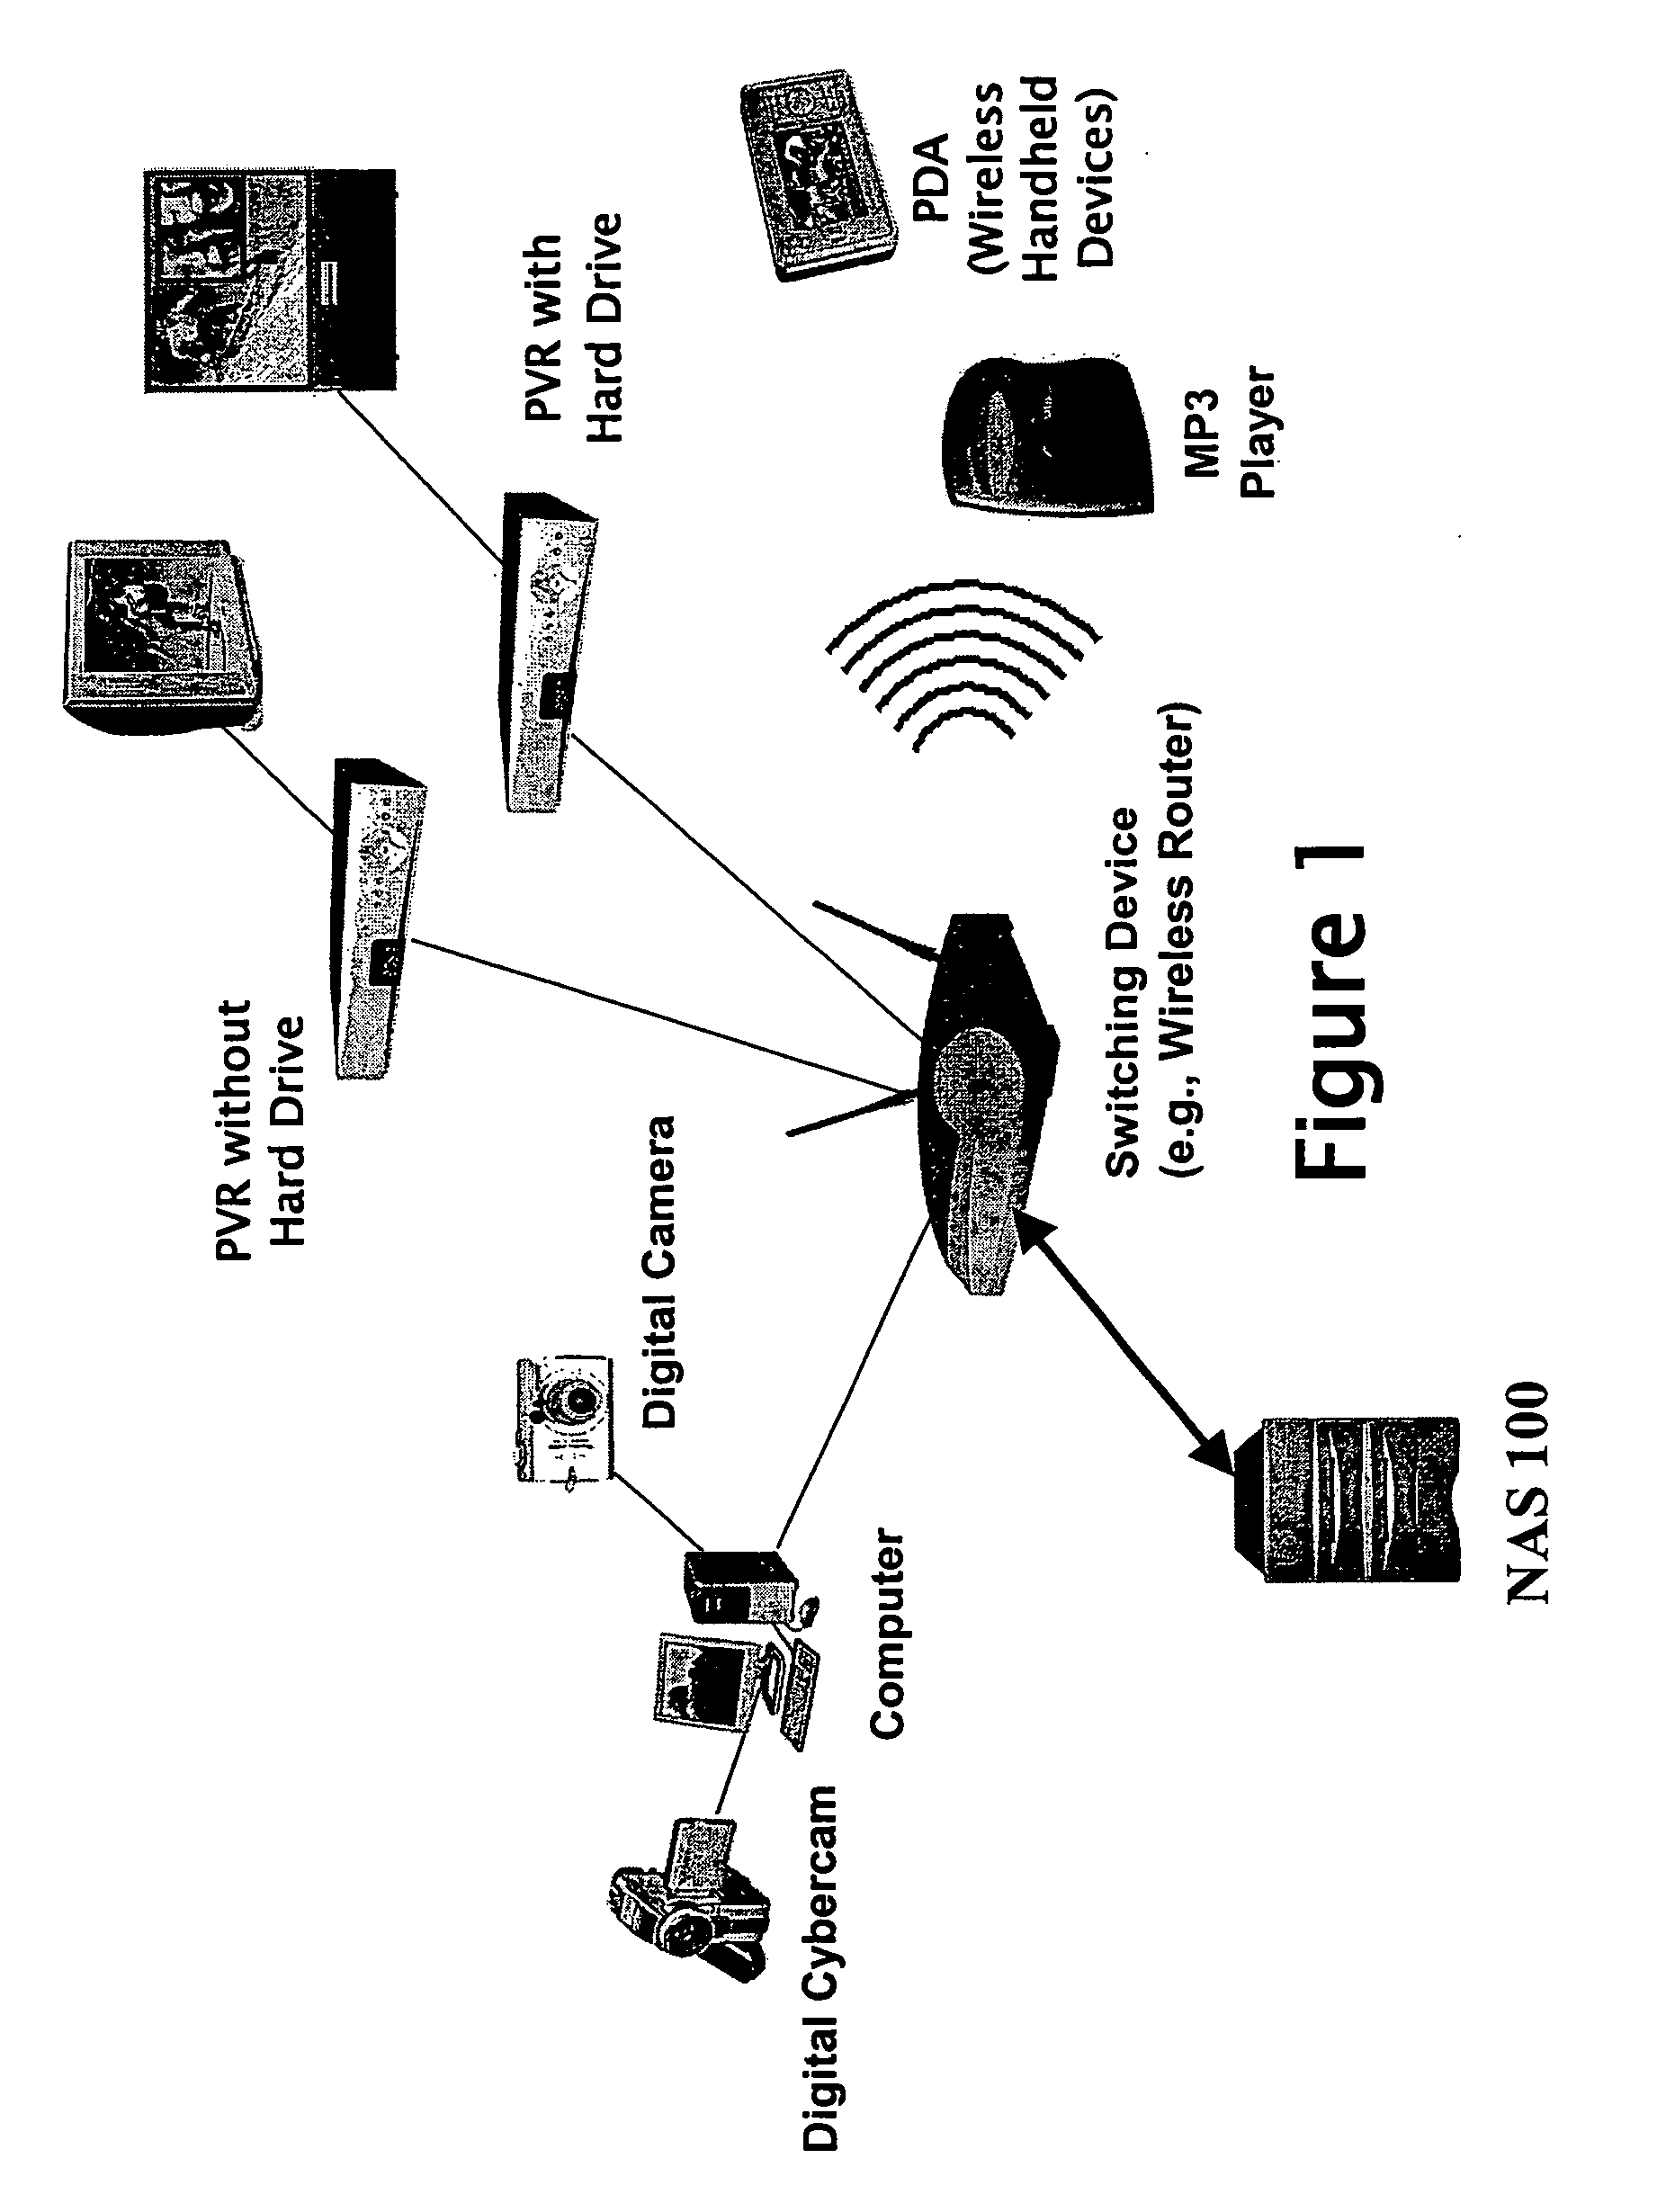 Method and system of data storage capacity allocation and management using one or more data storage drives